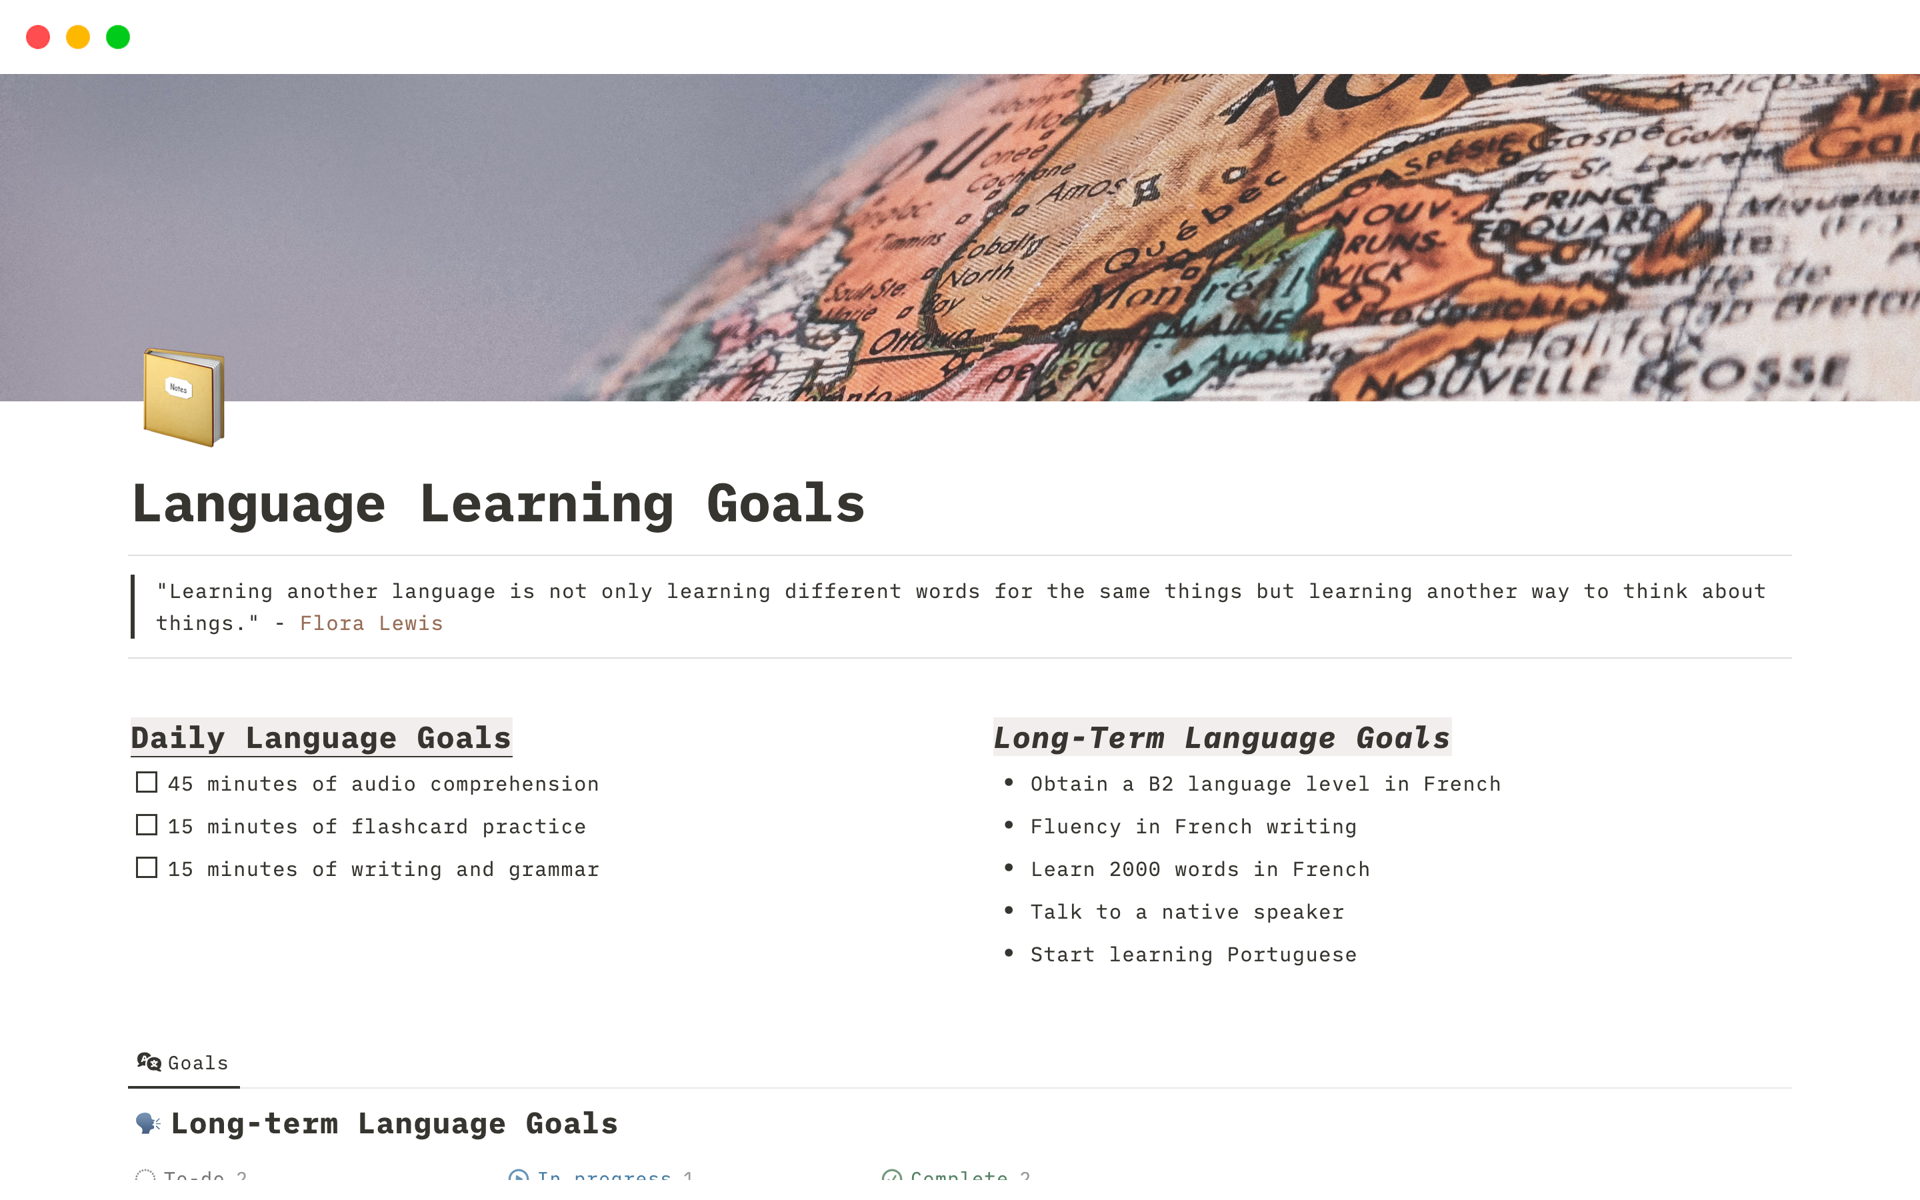 Helps structure your language learning goals.